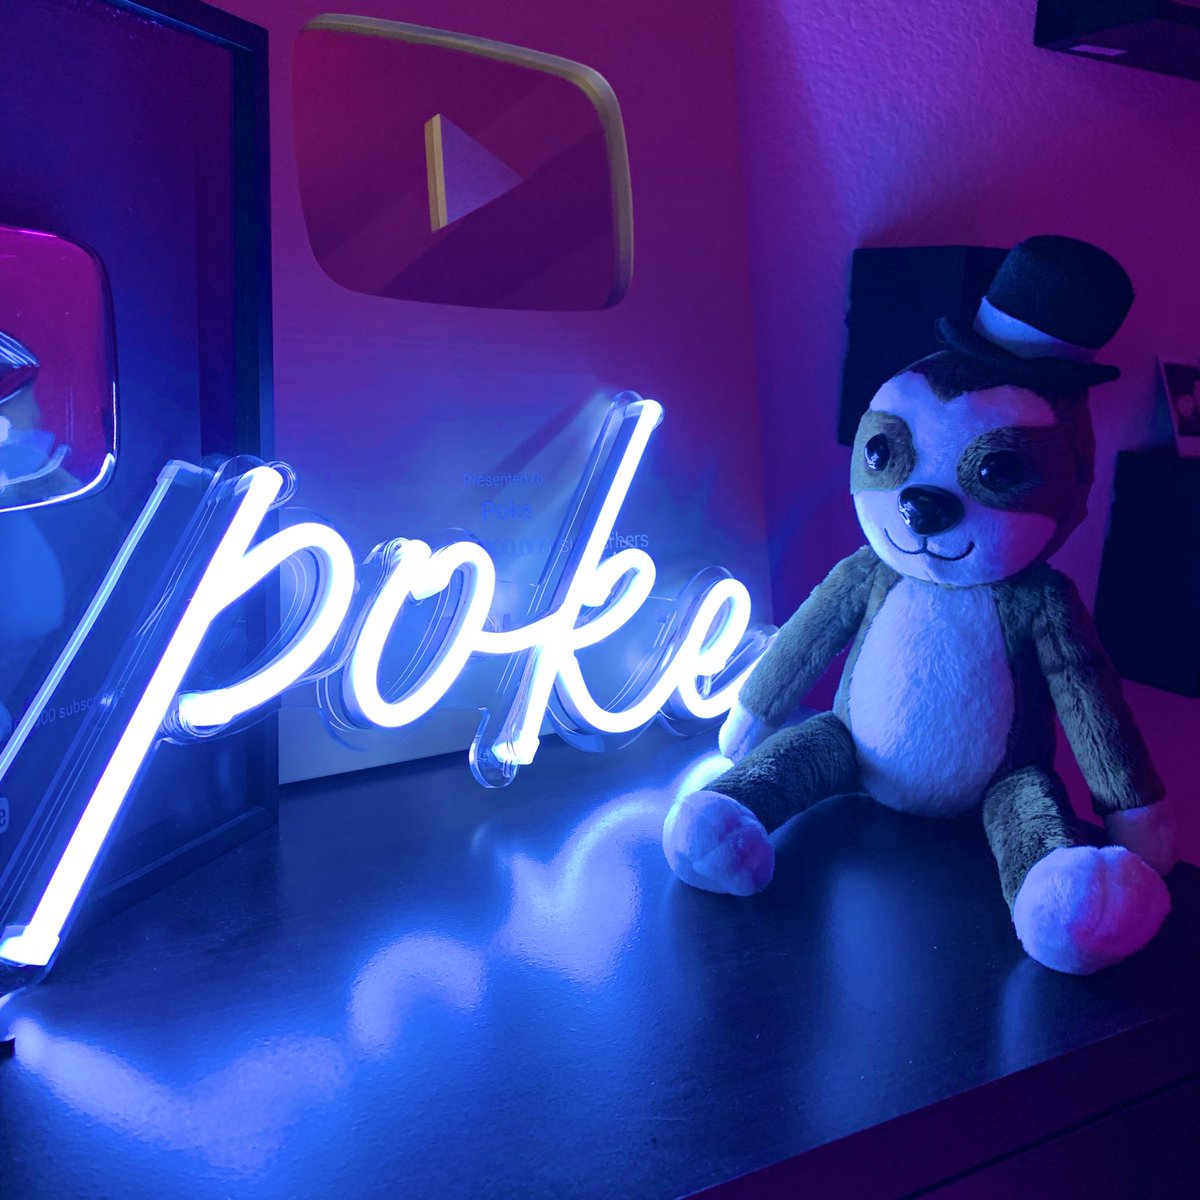 Poke On Twitter Sloth Plushies Now Available Https T Co Kt3zjjk3zf Rt To Spread The Word Teamsloth